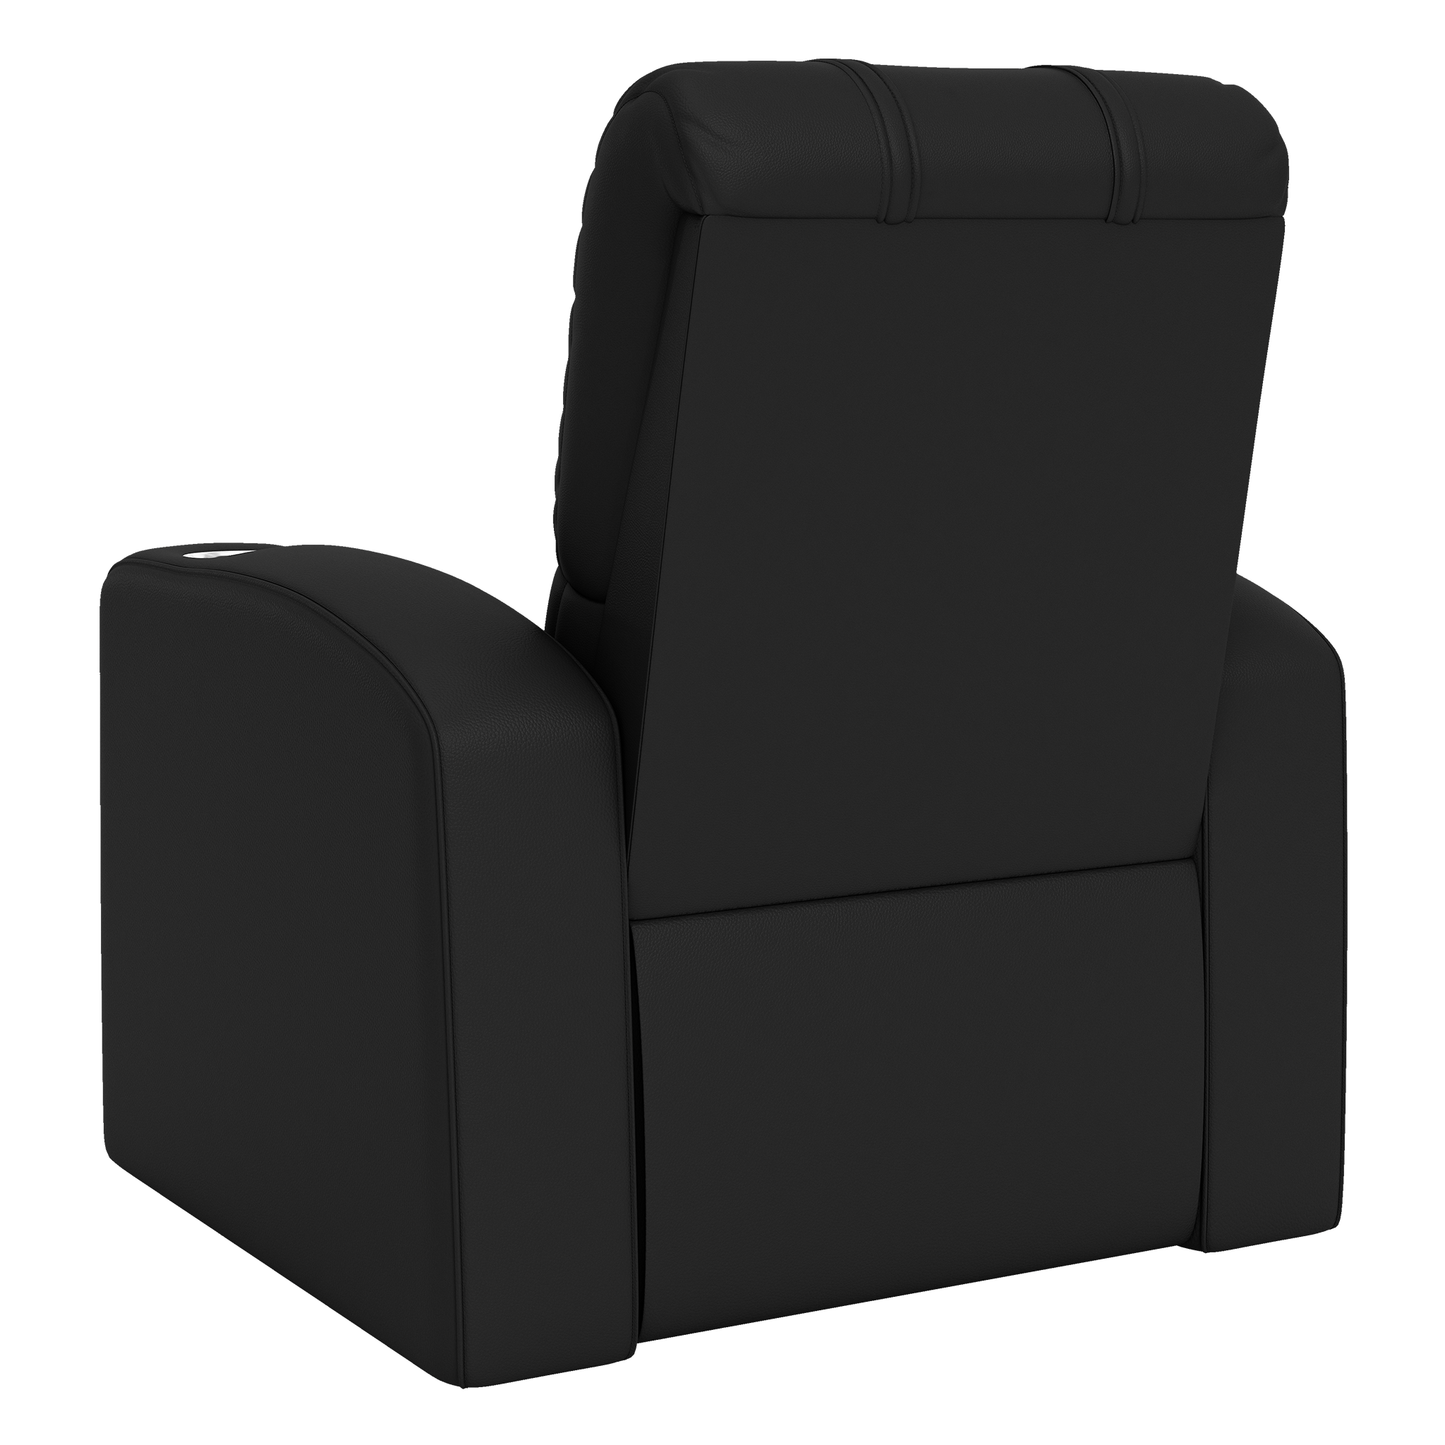 Relax Home Theater Recliner with Mississippi State Secondary